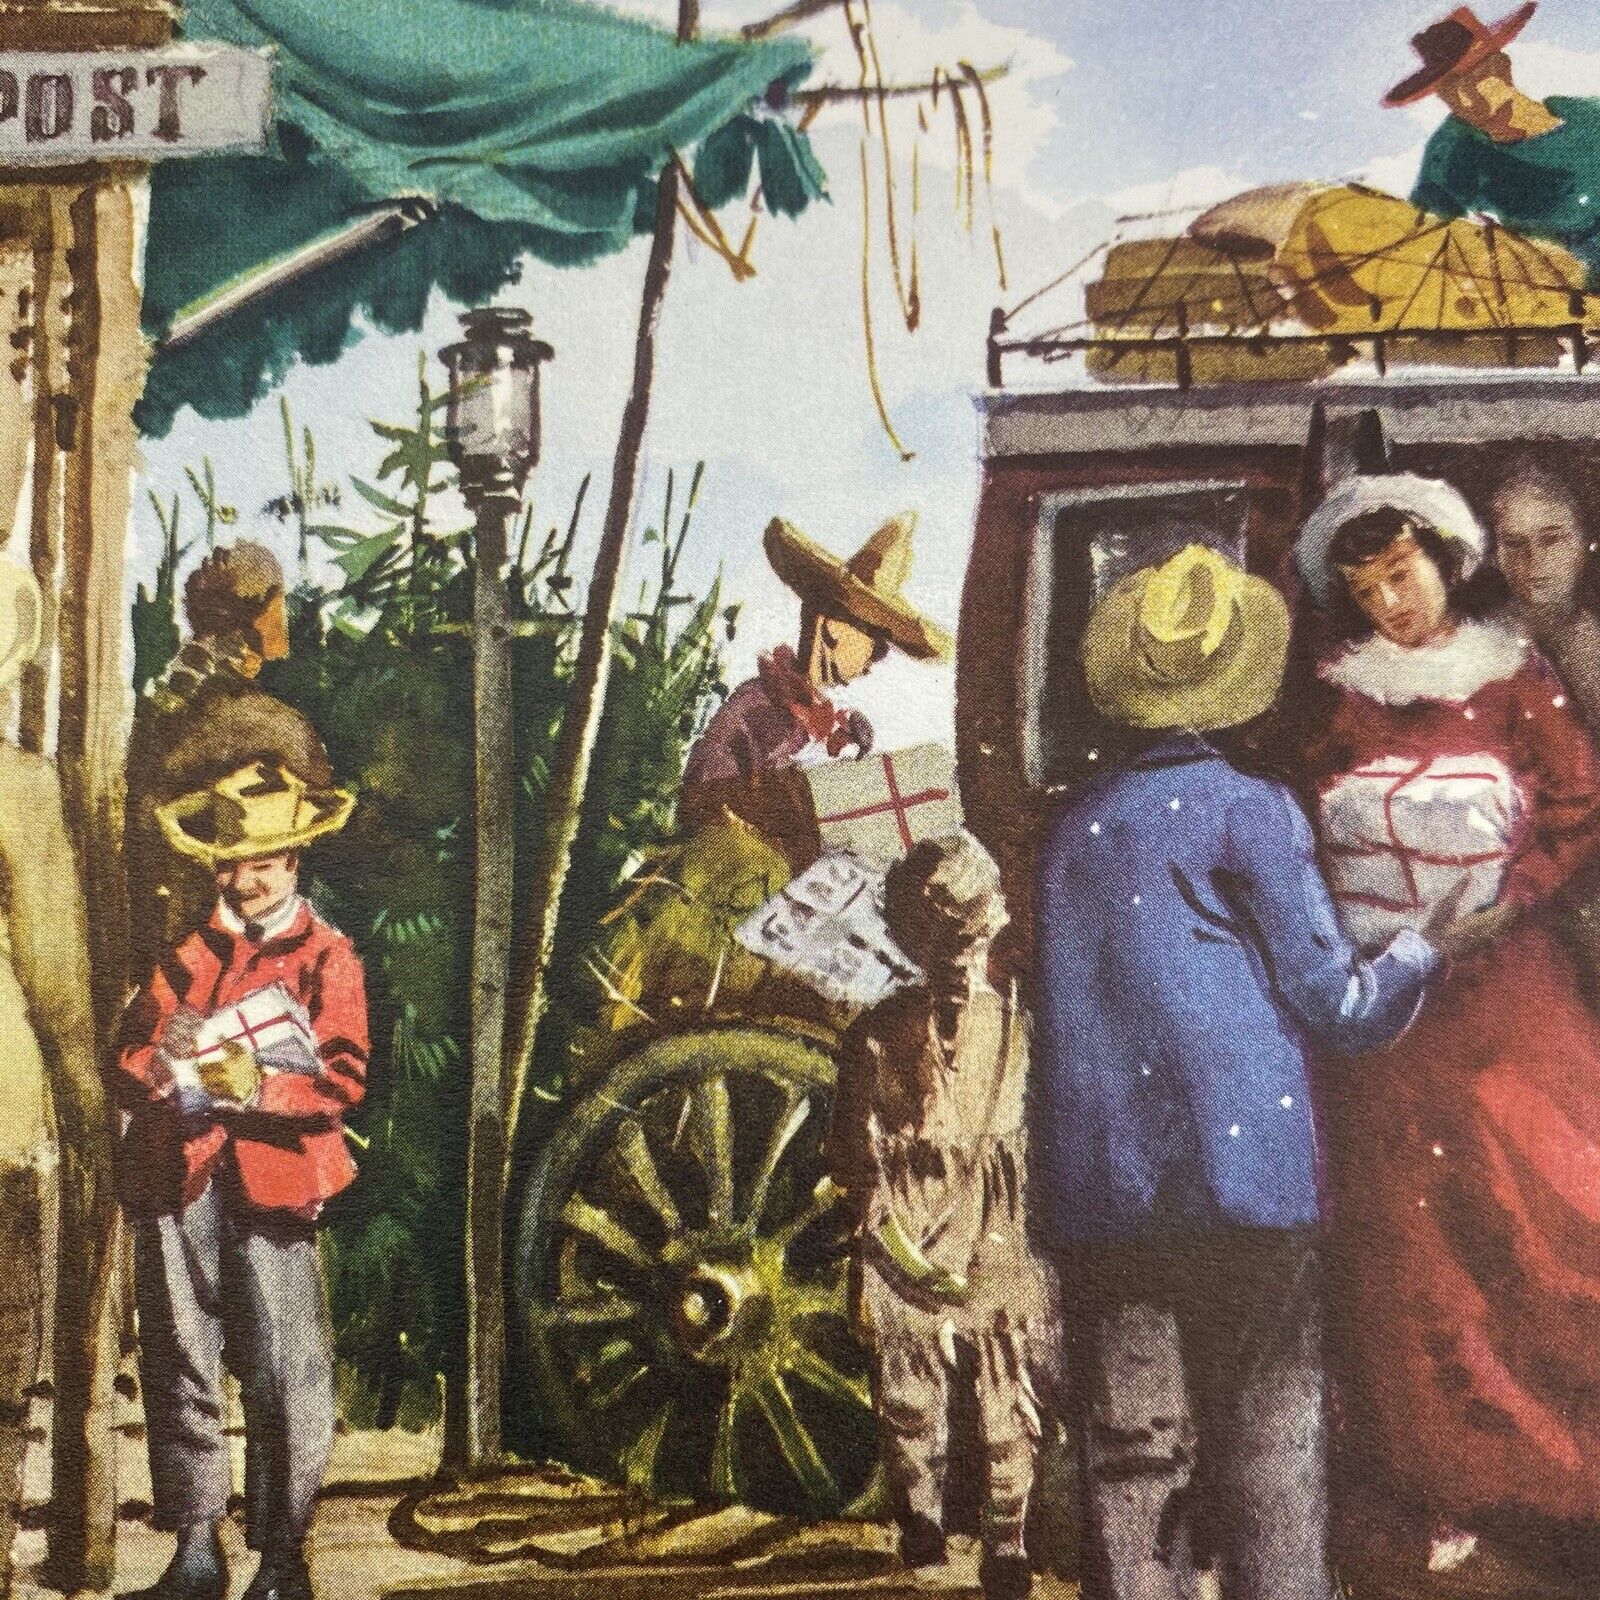 Vintage Mid Century Christmas Greeting Card Trading Post Townspeople Wagon